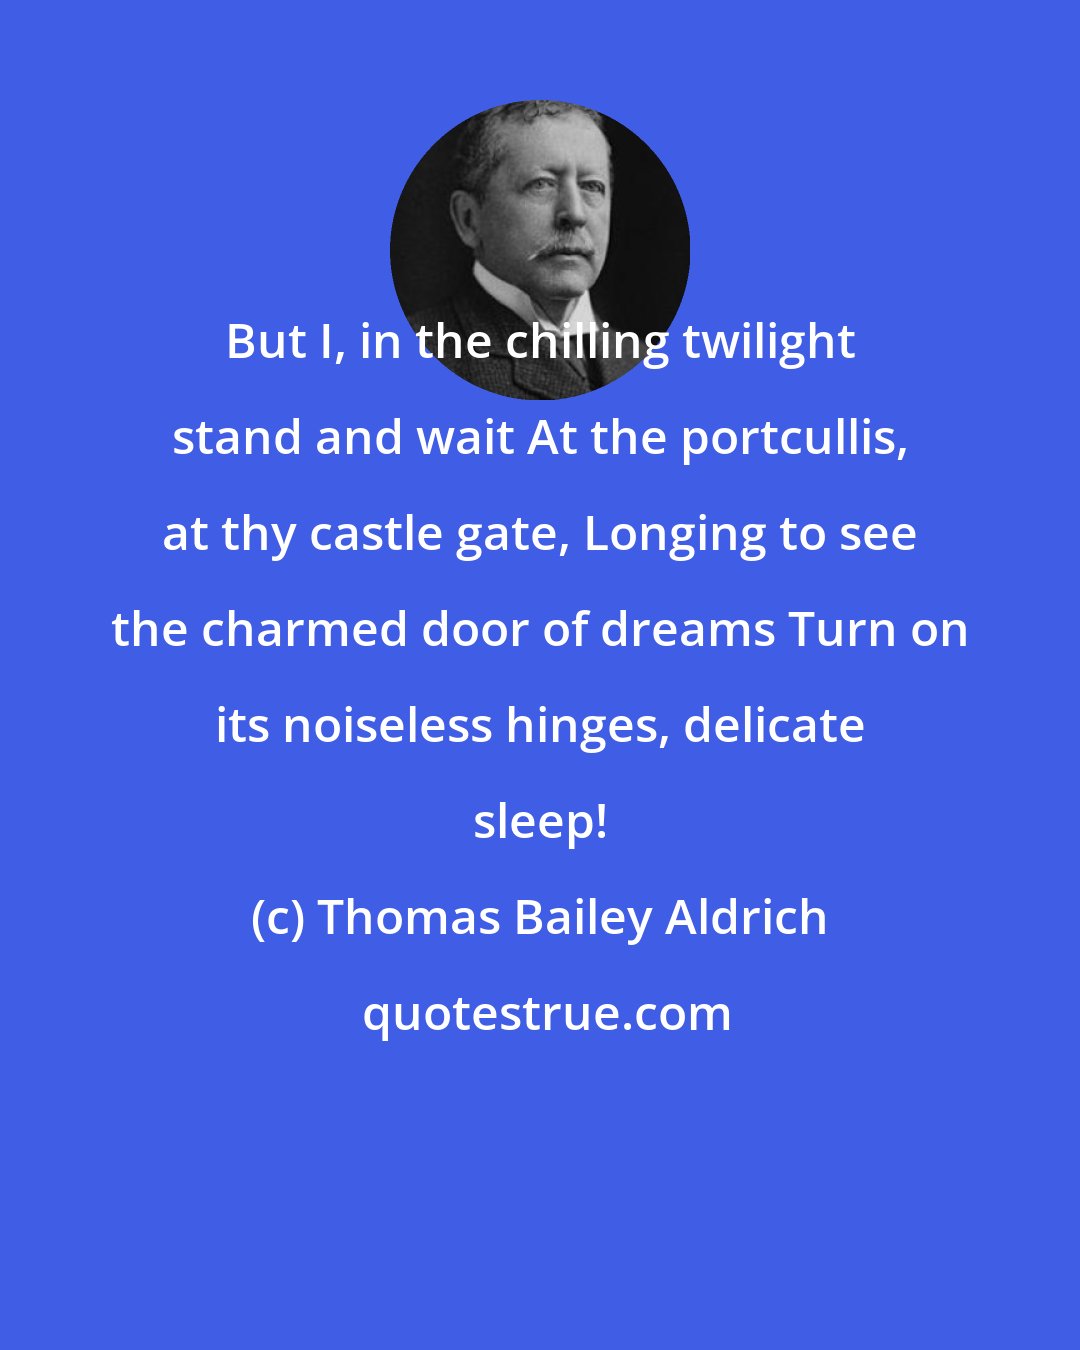 Thomas Bailey Aldrich: But I, in the chilling twilight stand and wait At the portcullis, at thy castle gate, Longing to see the charmed door of dreams Turn on its noiseless hinges, delicate sleep!